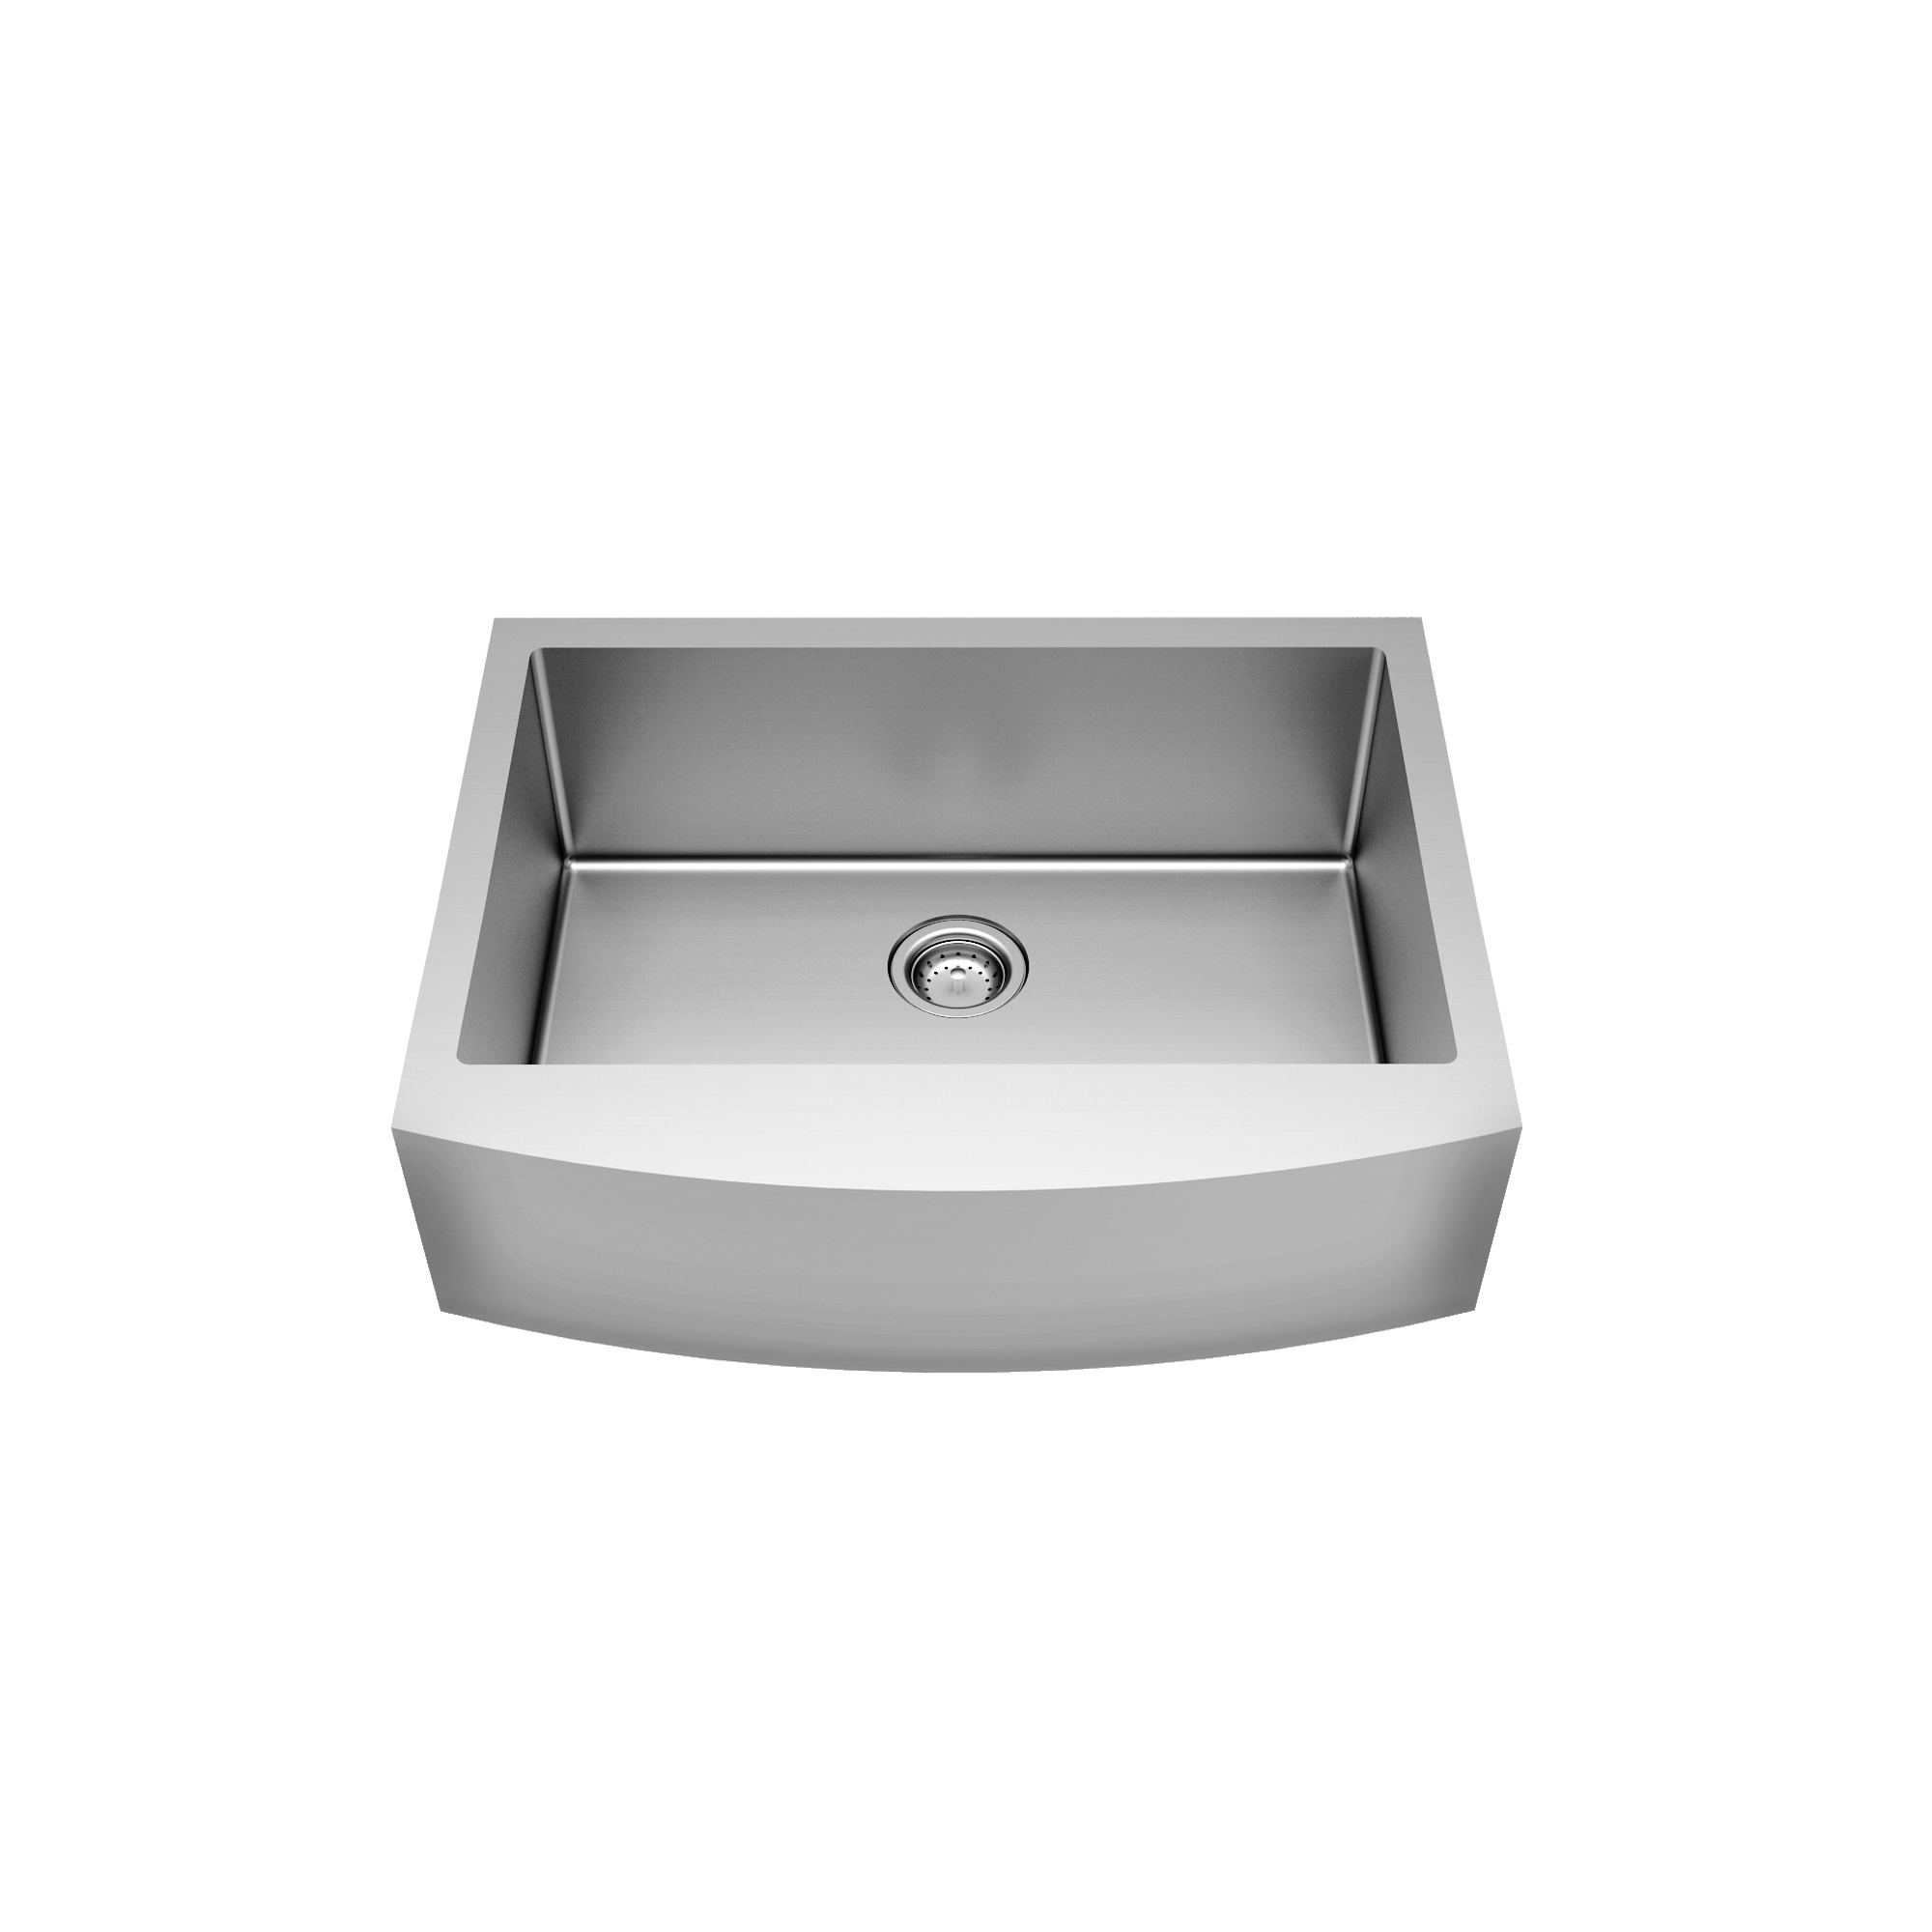 American Standard Pekoe Farmhouse/Apron-Front Stainless Steel 33 in. Single Bowl Kitchen Sink - image 1 of 6